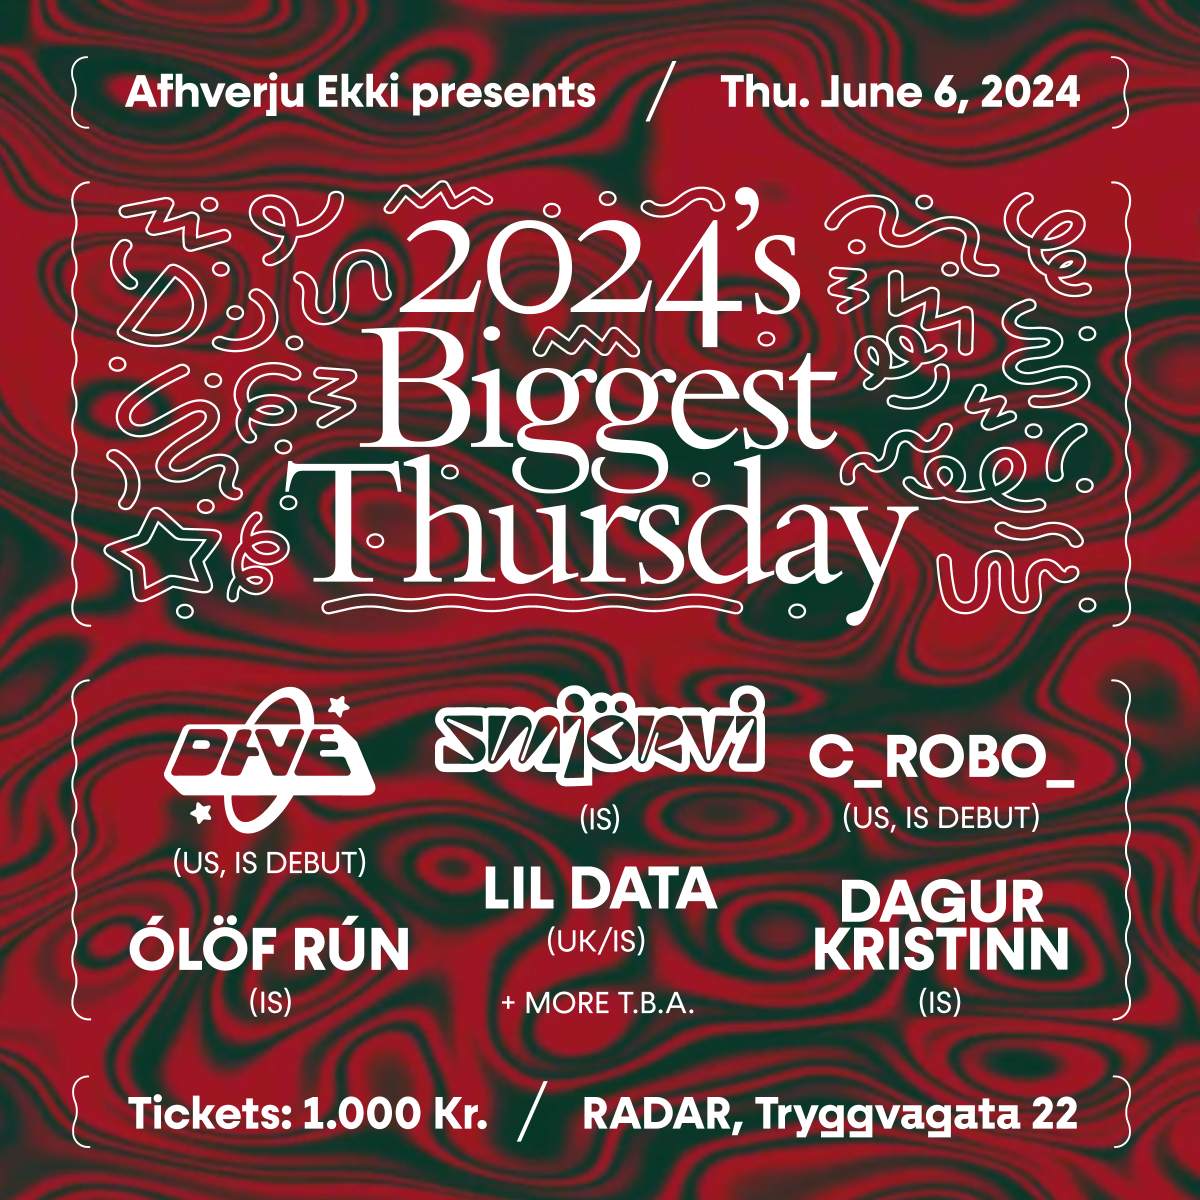 2024's Biggest Thursday with DJ_Dave + Smjörvi + Lil Data - フライヤー表